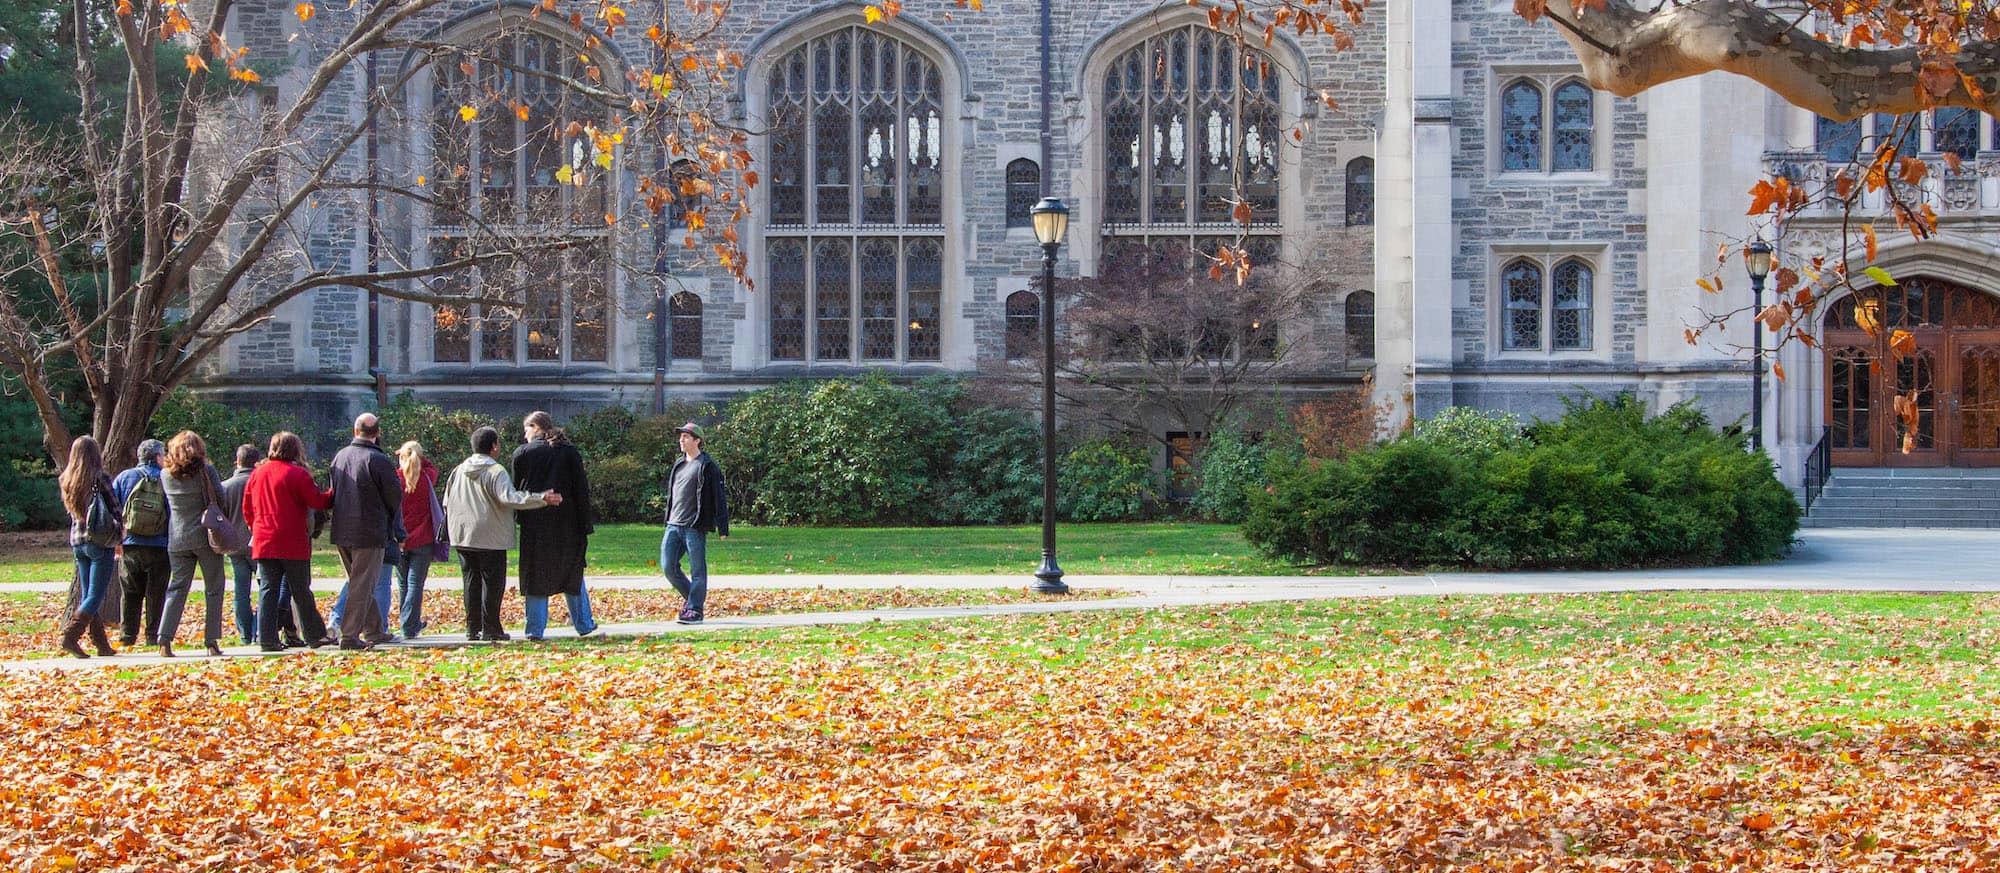 A group of people walk towards the Thompson Memorial Library, a stone building with large glass windows, on a fall day.